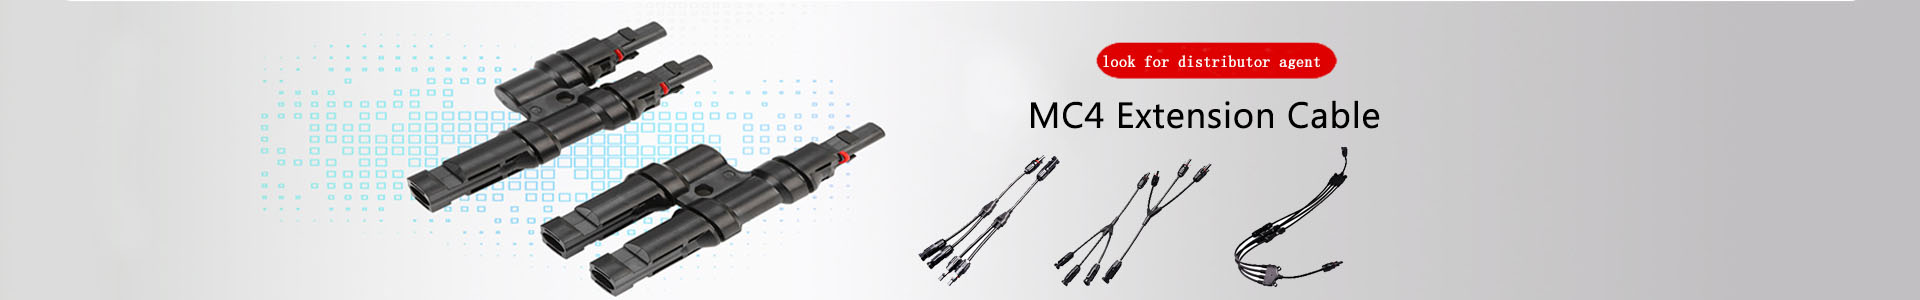 Company Profile | Handwe Group-Solar | solar connector,solar branch connector,diode fuse connector,MC4 extnsion cable,H1Z2Z2 solar cable, UL4703 solar cable | Leading manufacturer and supplier of solar pv cables and connectors